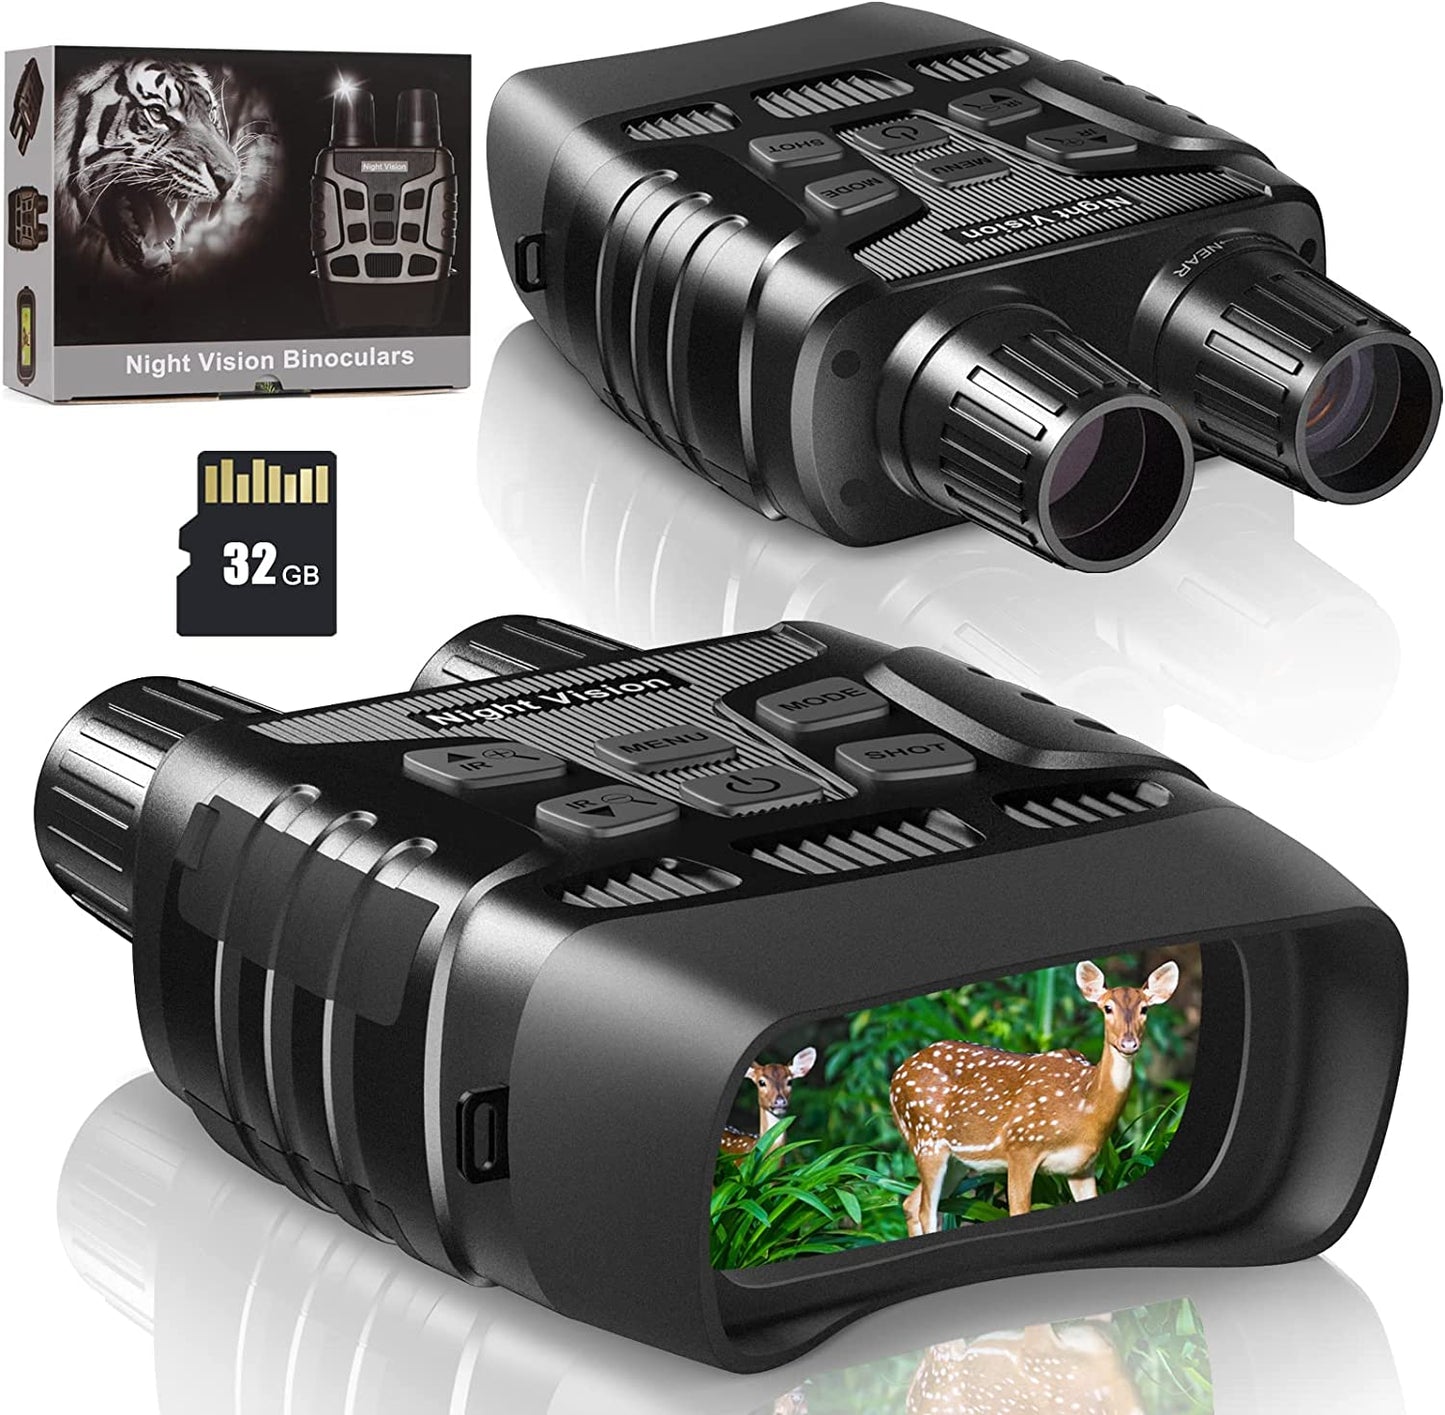 NEWBEA Night Vision Goggles Night Vision Binoculars for 100% Darkness, Digital Military Infrared Binoculars can Take Photo and Video, with 32G Memory Card